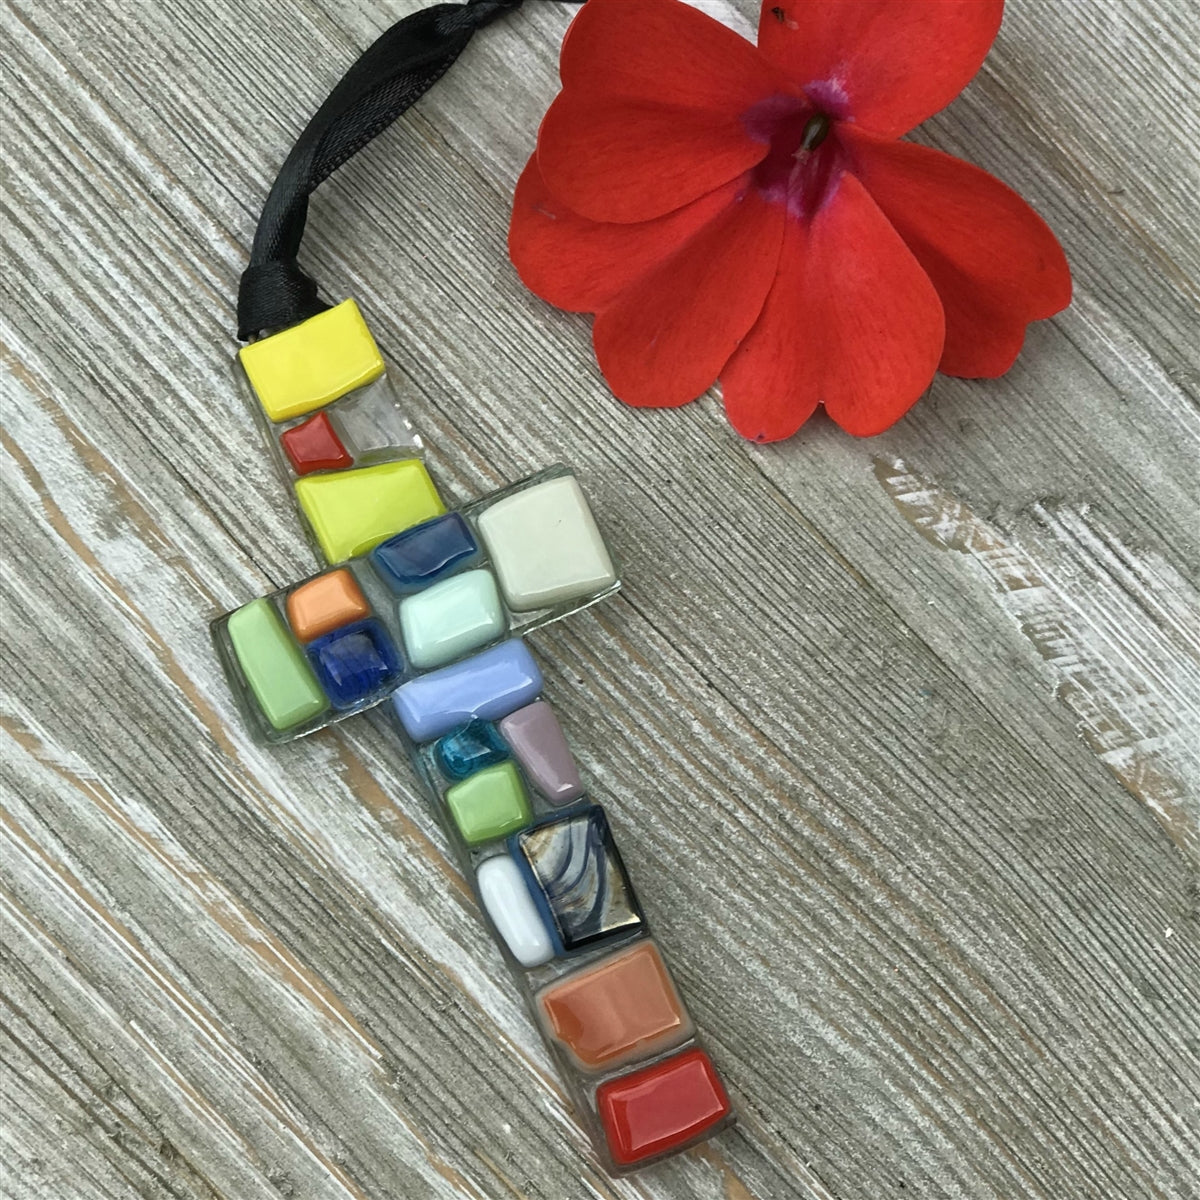 Multi-colored glass mosaic ornament with black satin ribbon for hanging.